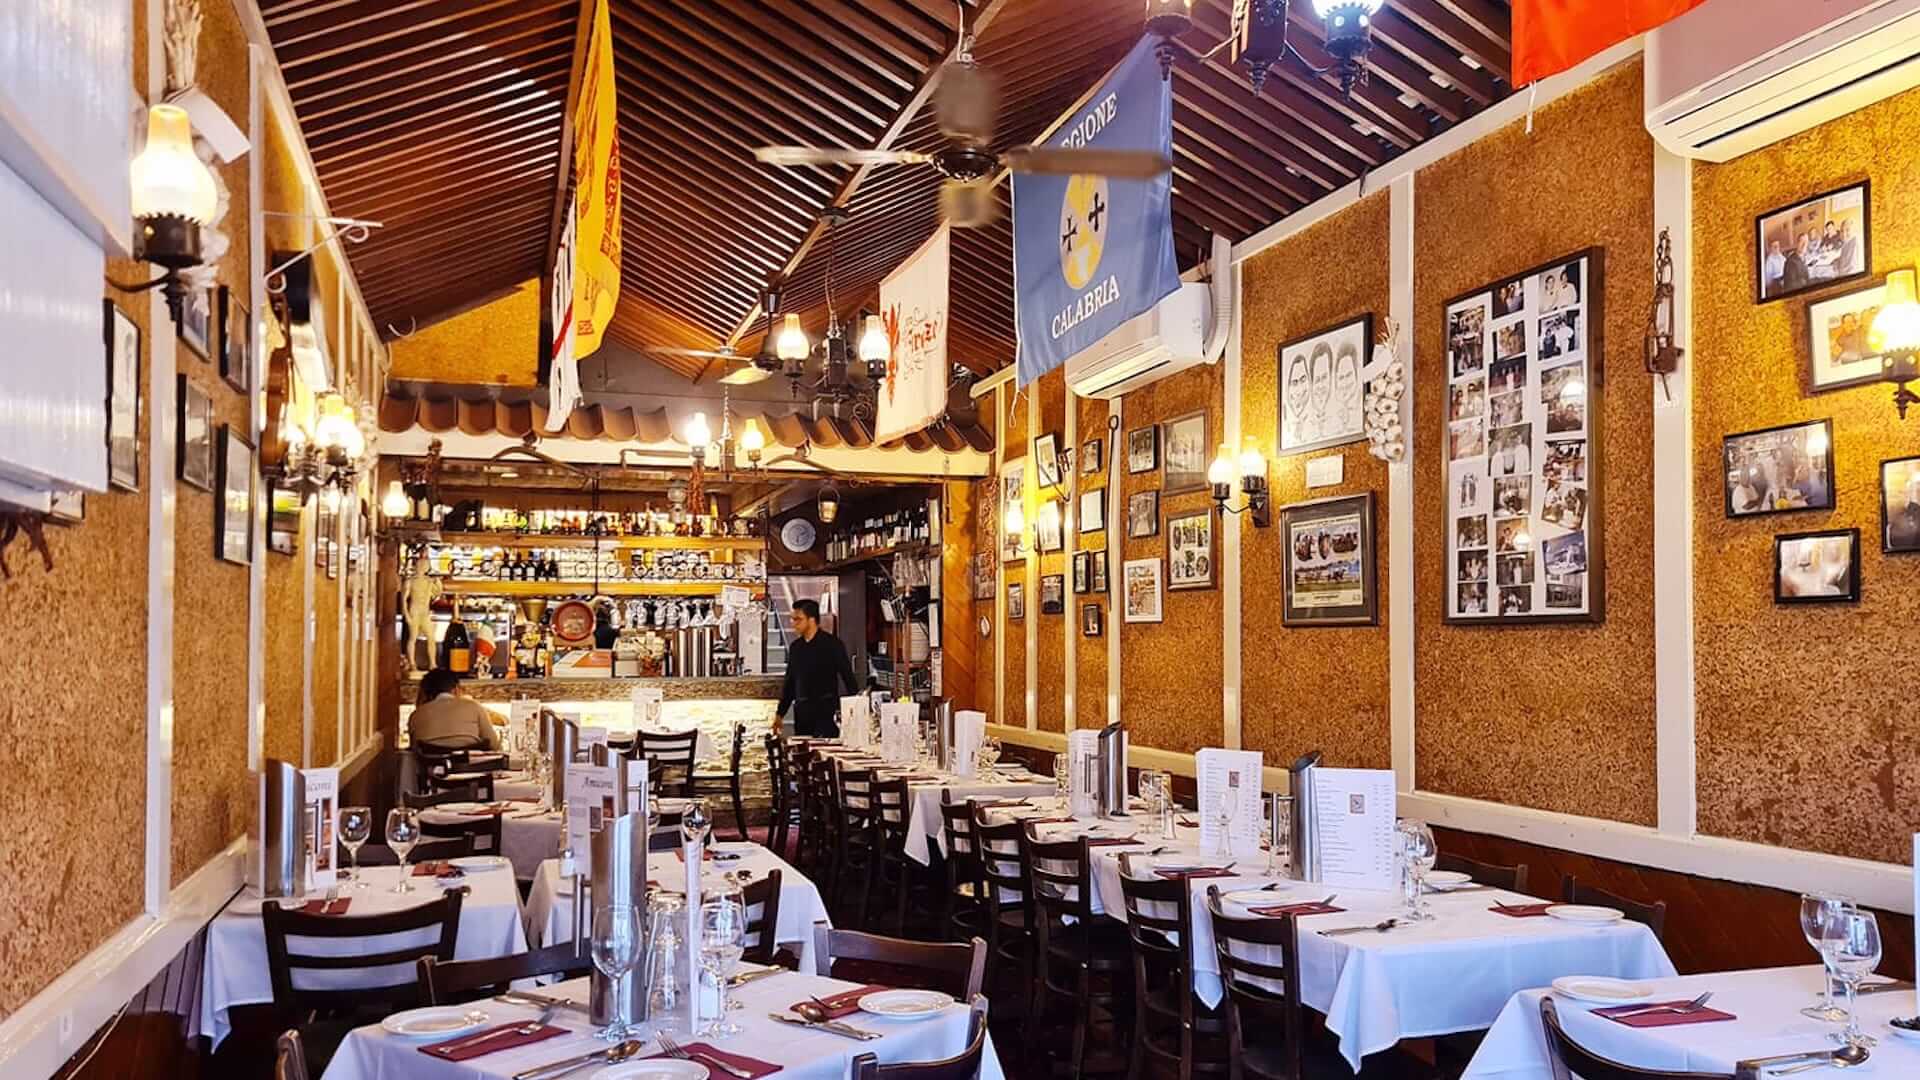 best italian restaurants melbourne - amiconi dining room in west melbourne - also home to the best pasta in Melbourne